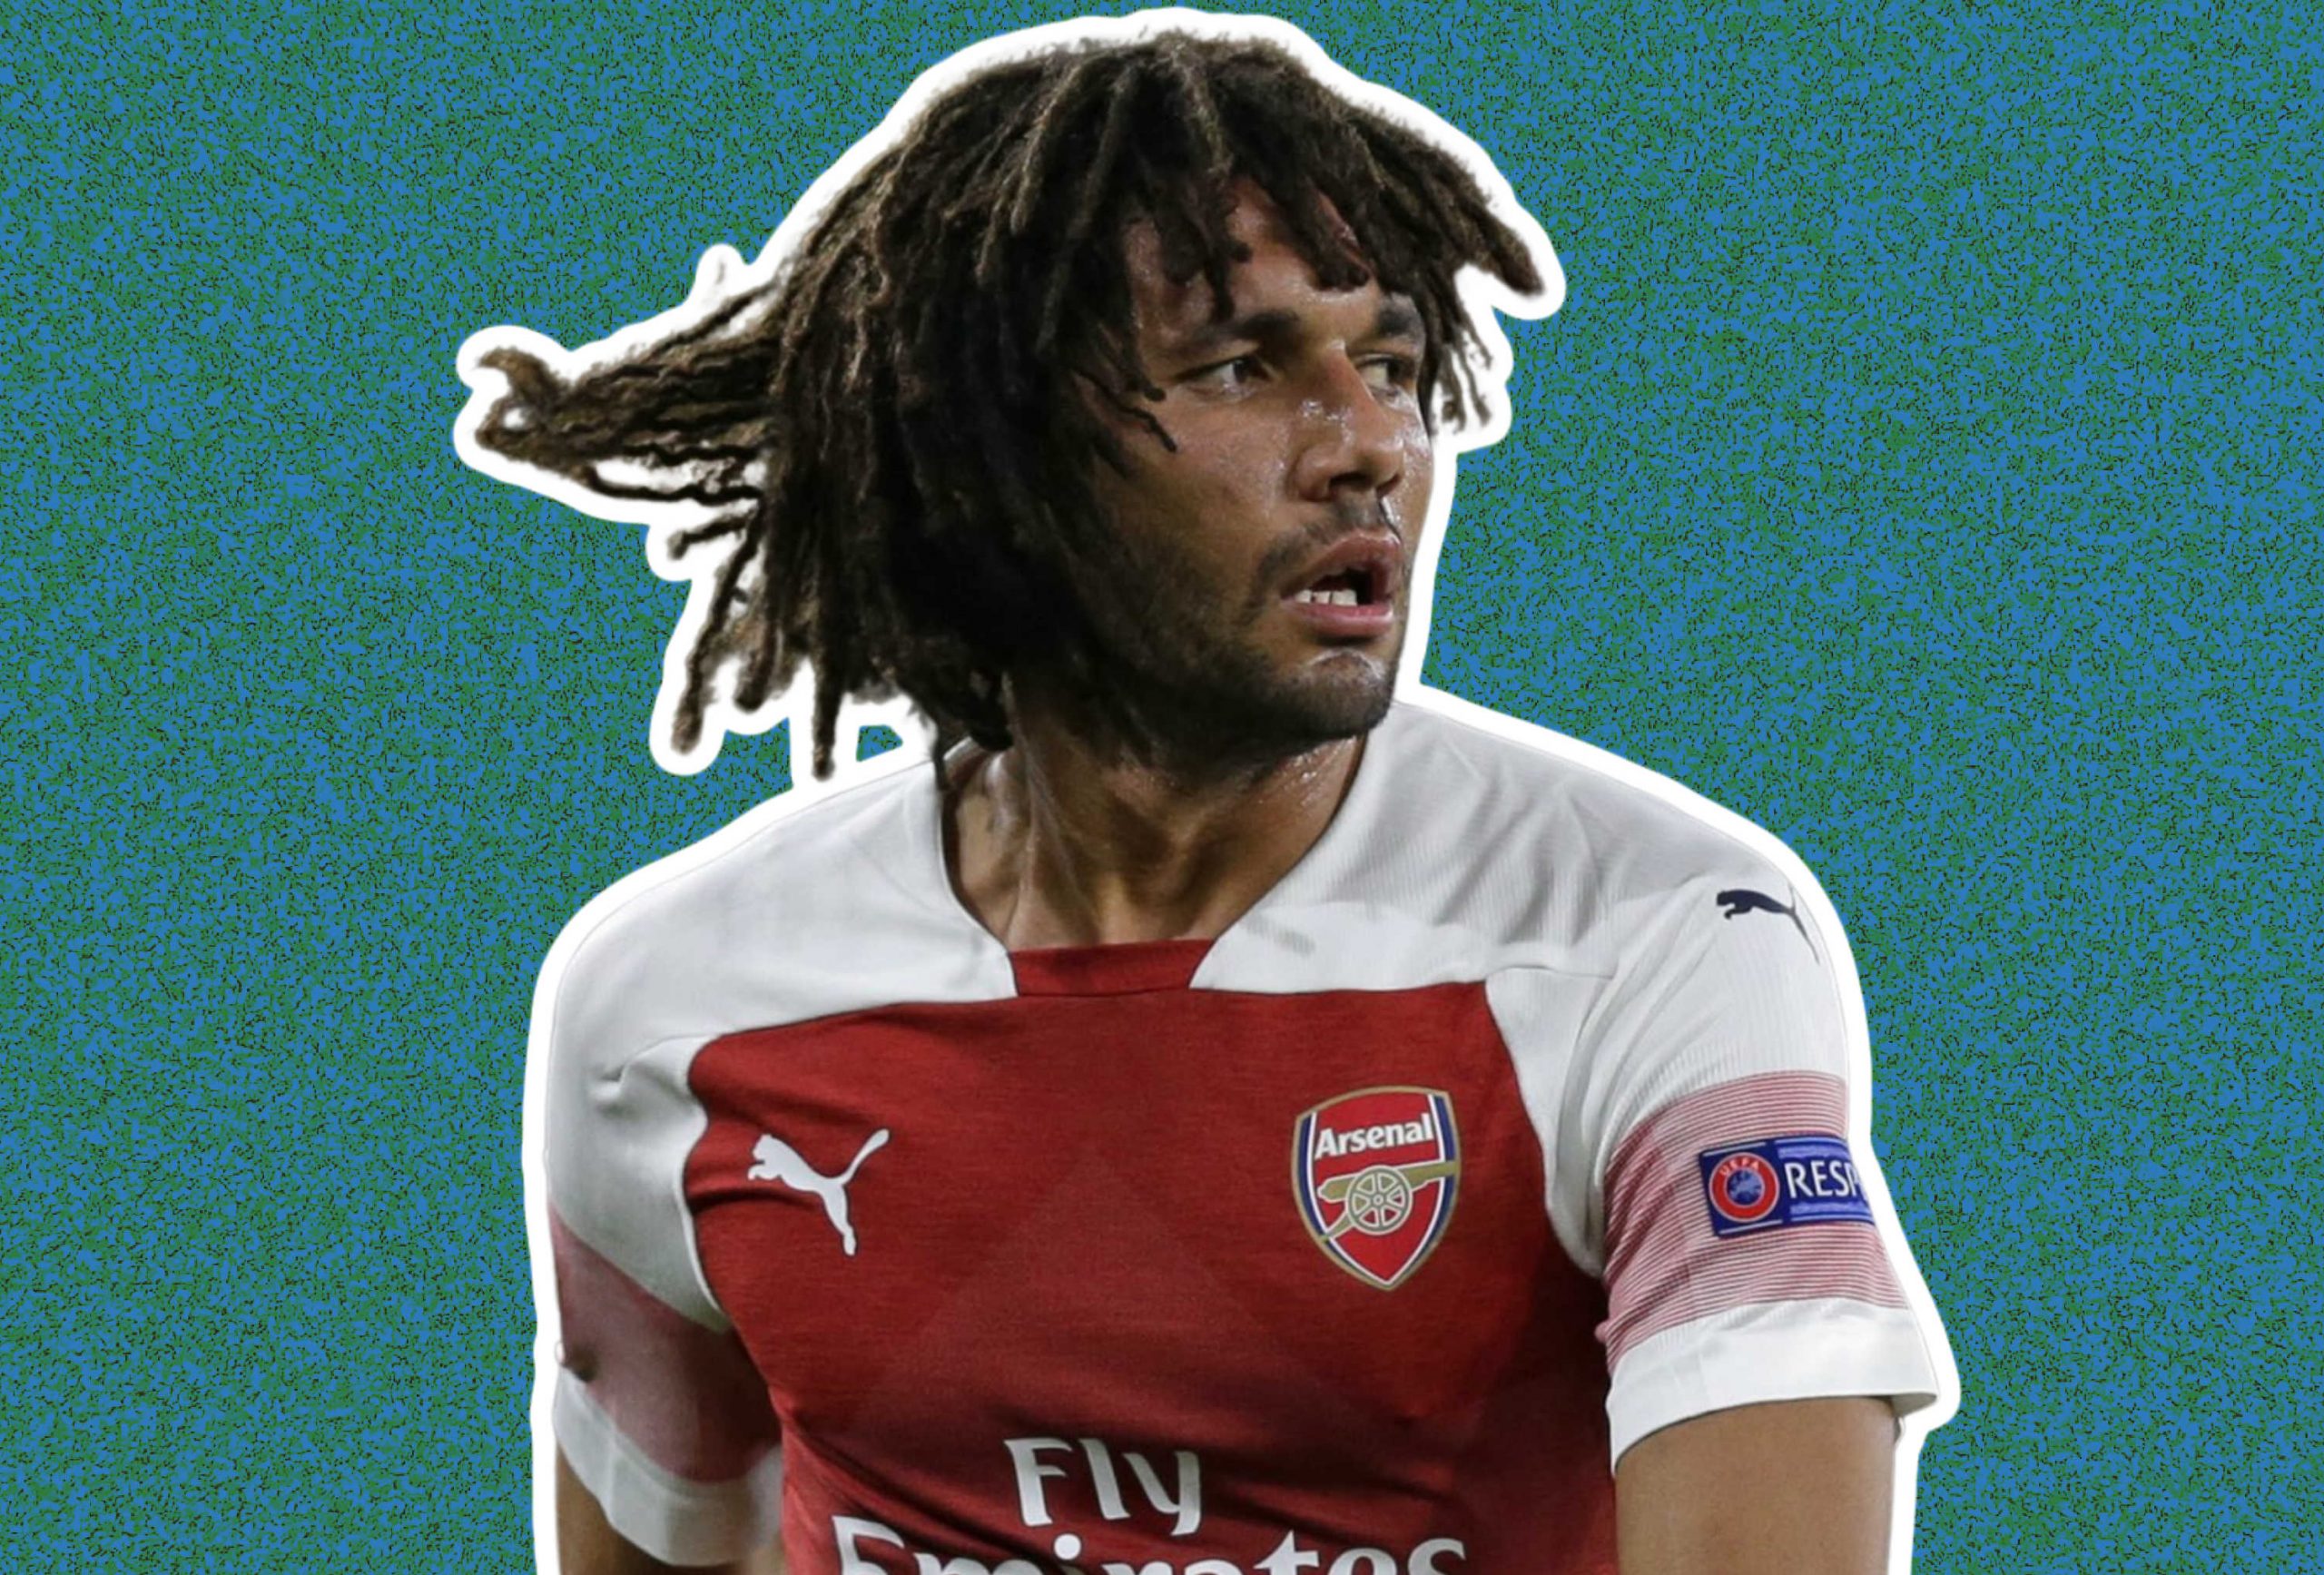 This Elneny back pass against City sums up the lack of intent holding Arsenal back at the moment